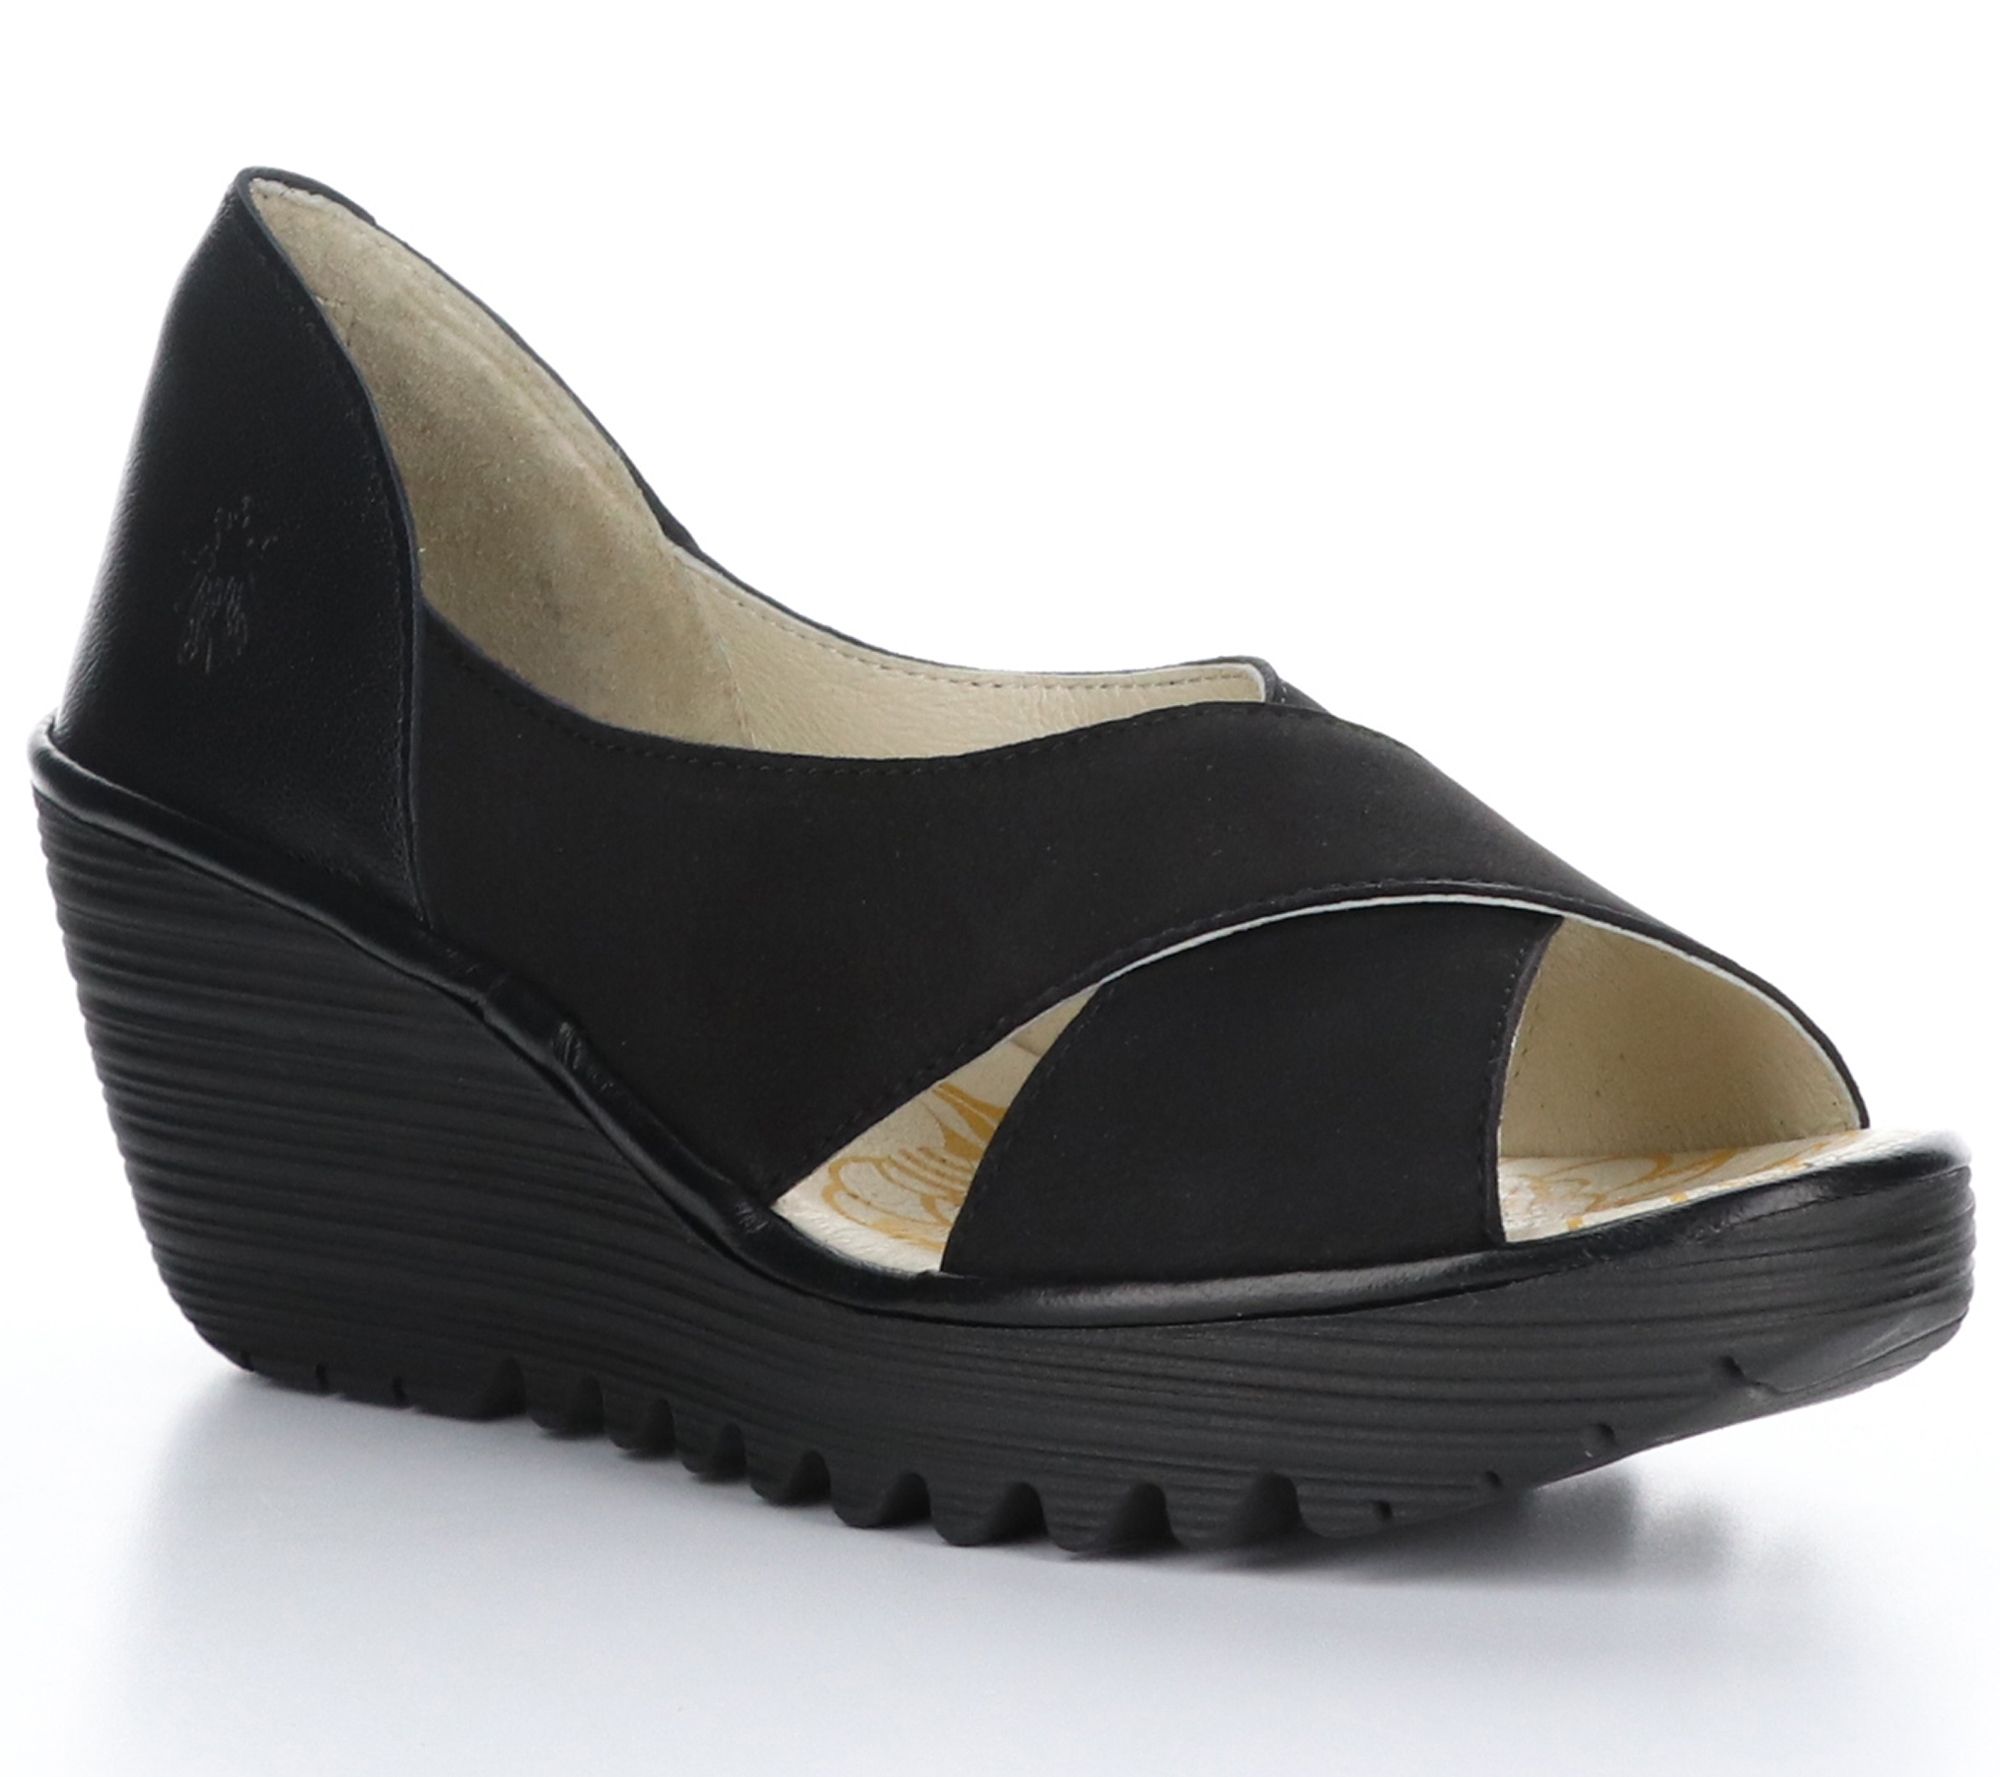 London Pull-On Pumps - Yoma -